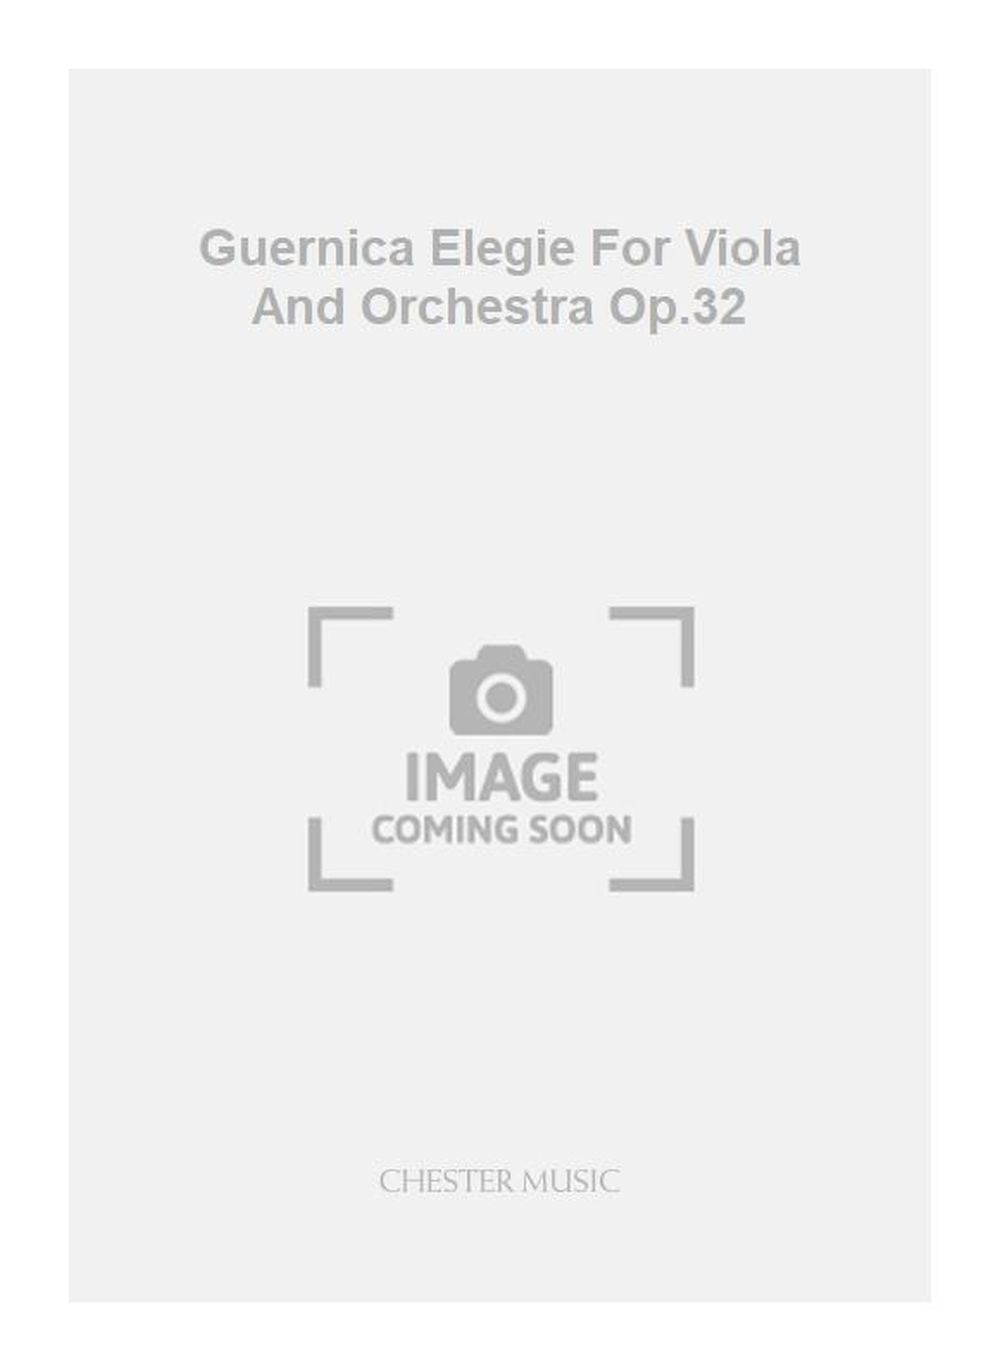 Walter Steffens: Guernica Elegie For Viola And Orchestra Op.32